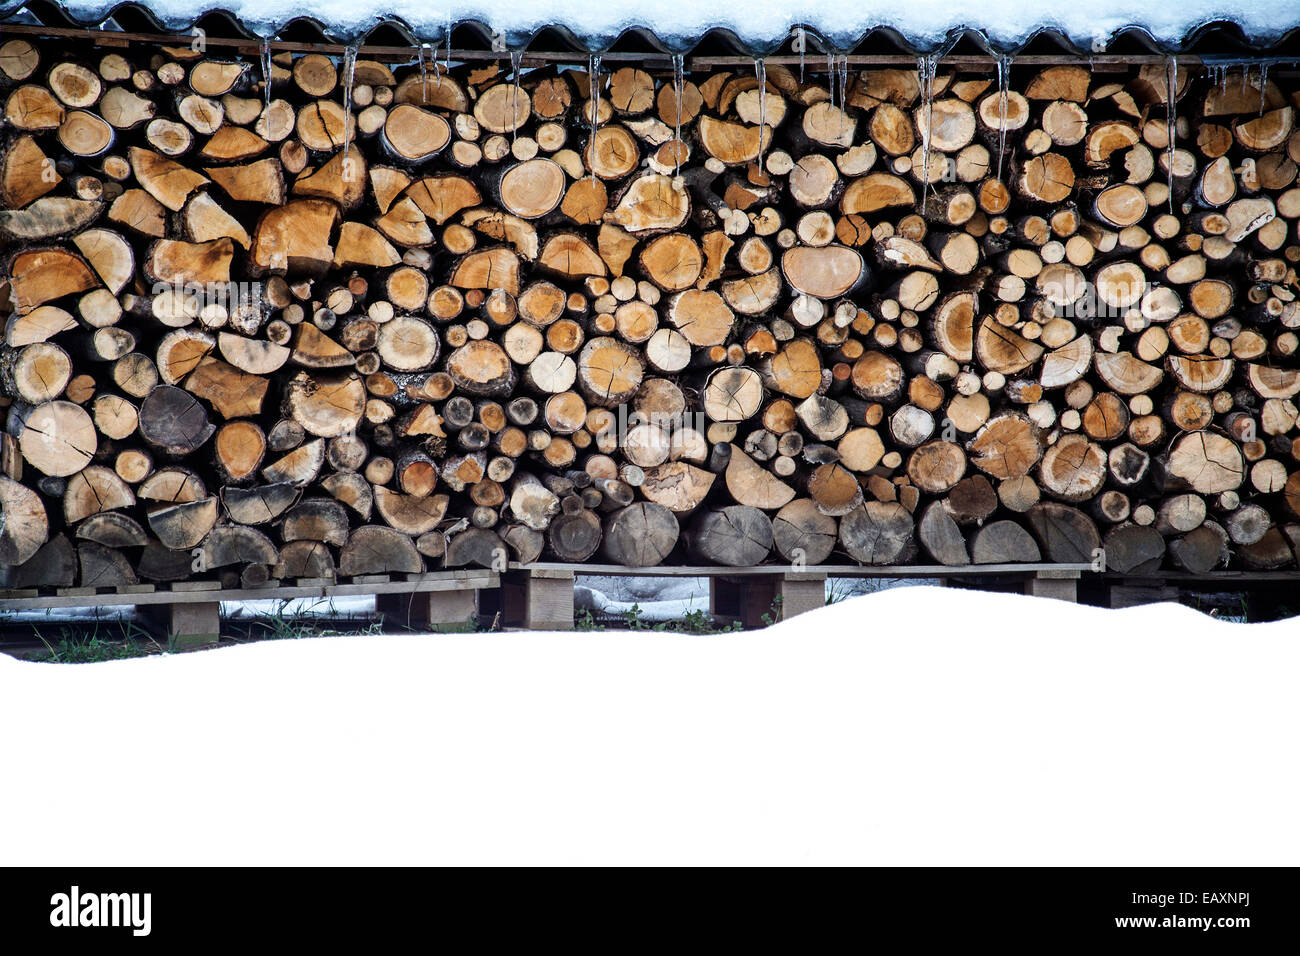 Wood pile of fire wood, stacked under a little roof Stock Photo